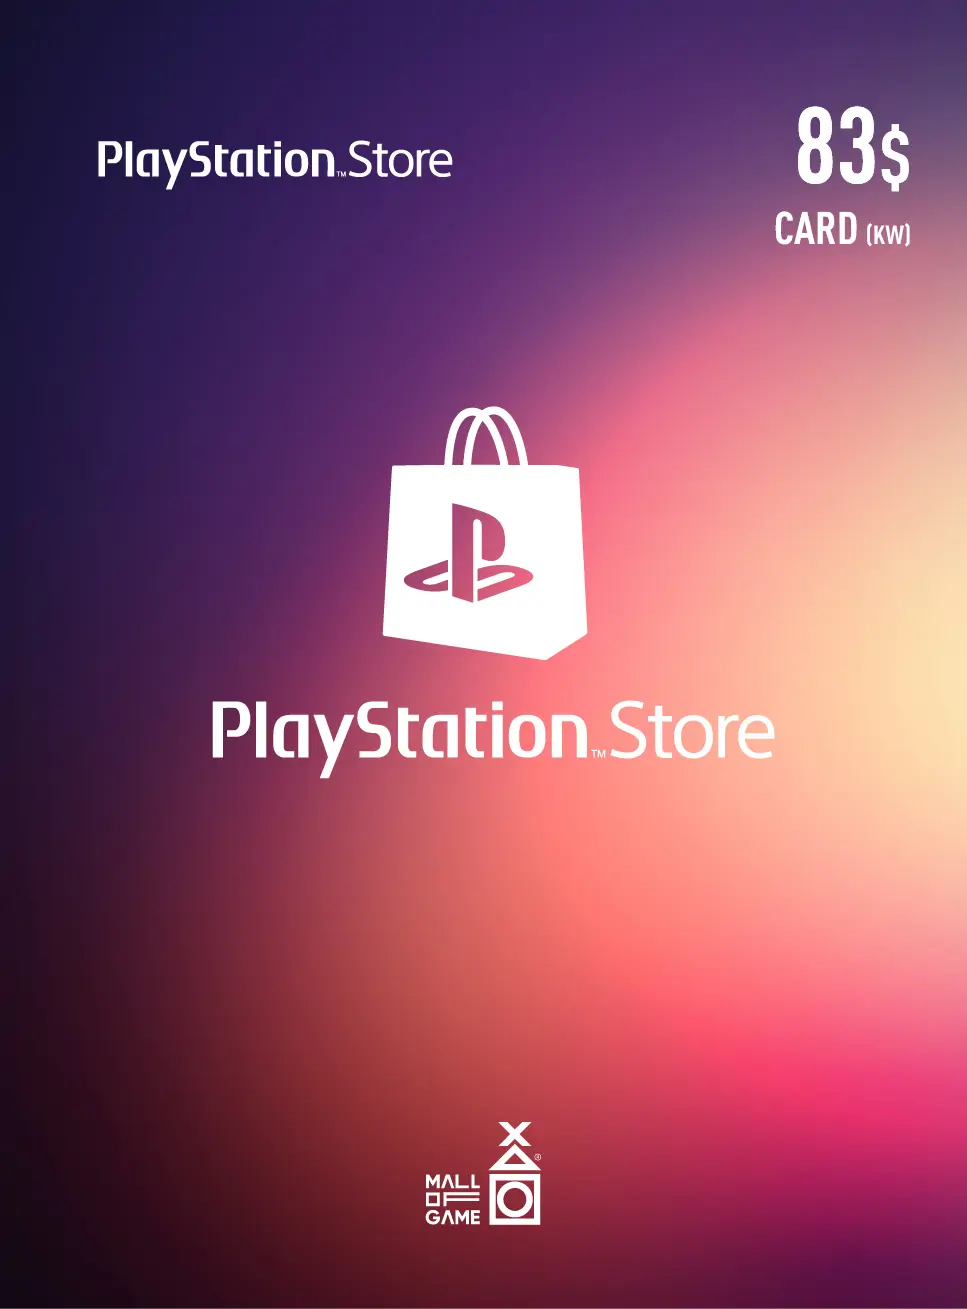 PlayStation™Store USD83 Gift Cards (KW)